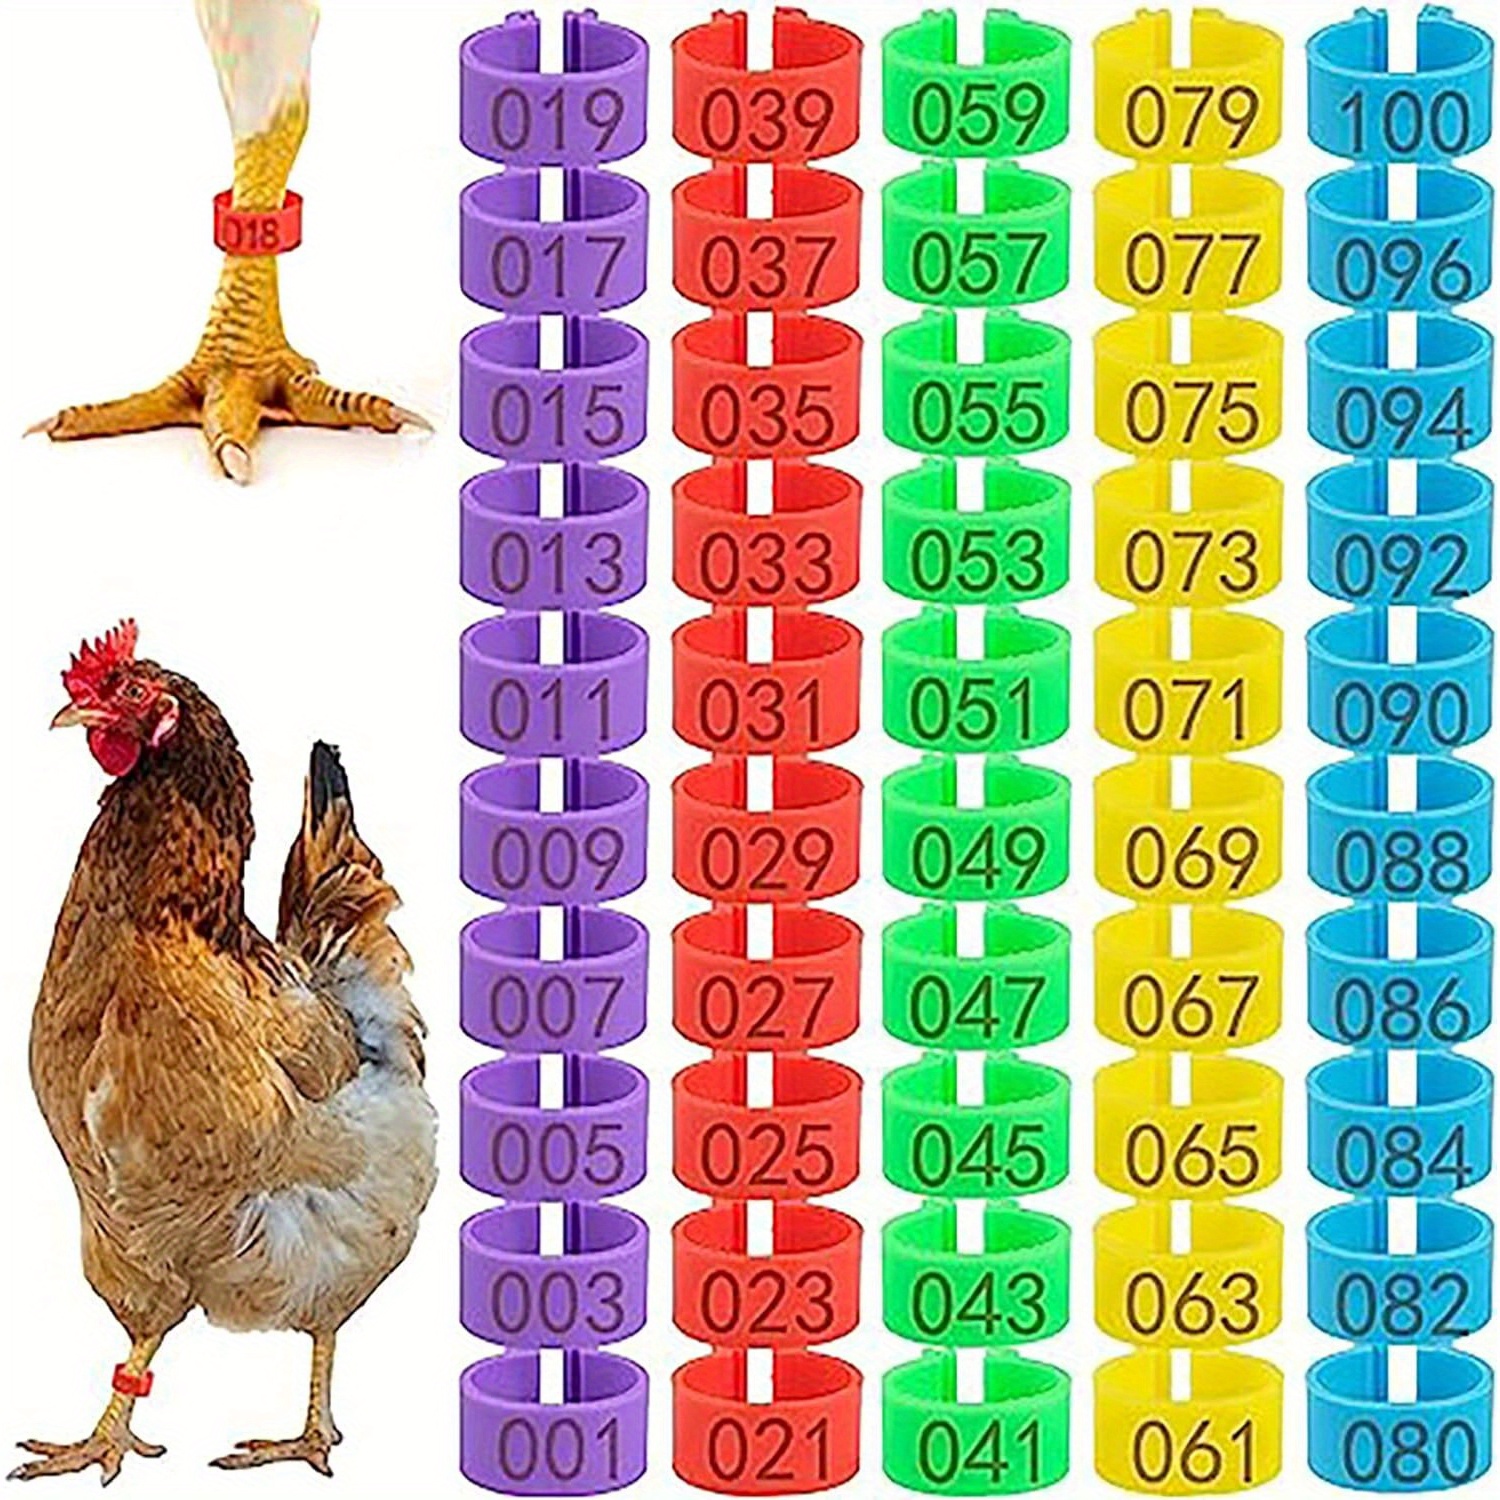 

100pcs Chicken Leg Bands, Colorful Numbered Chicken Tags For Legs, Poultry Leg Bands For Ducks, Chicks, Goose